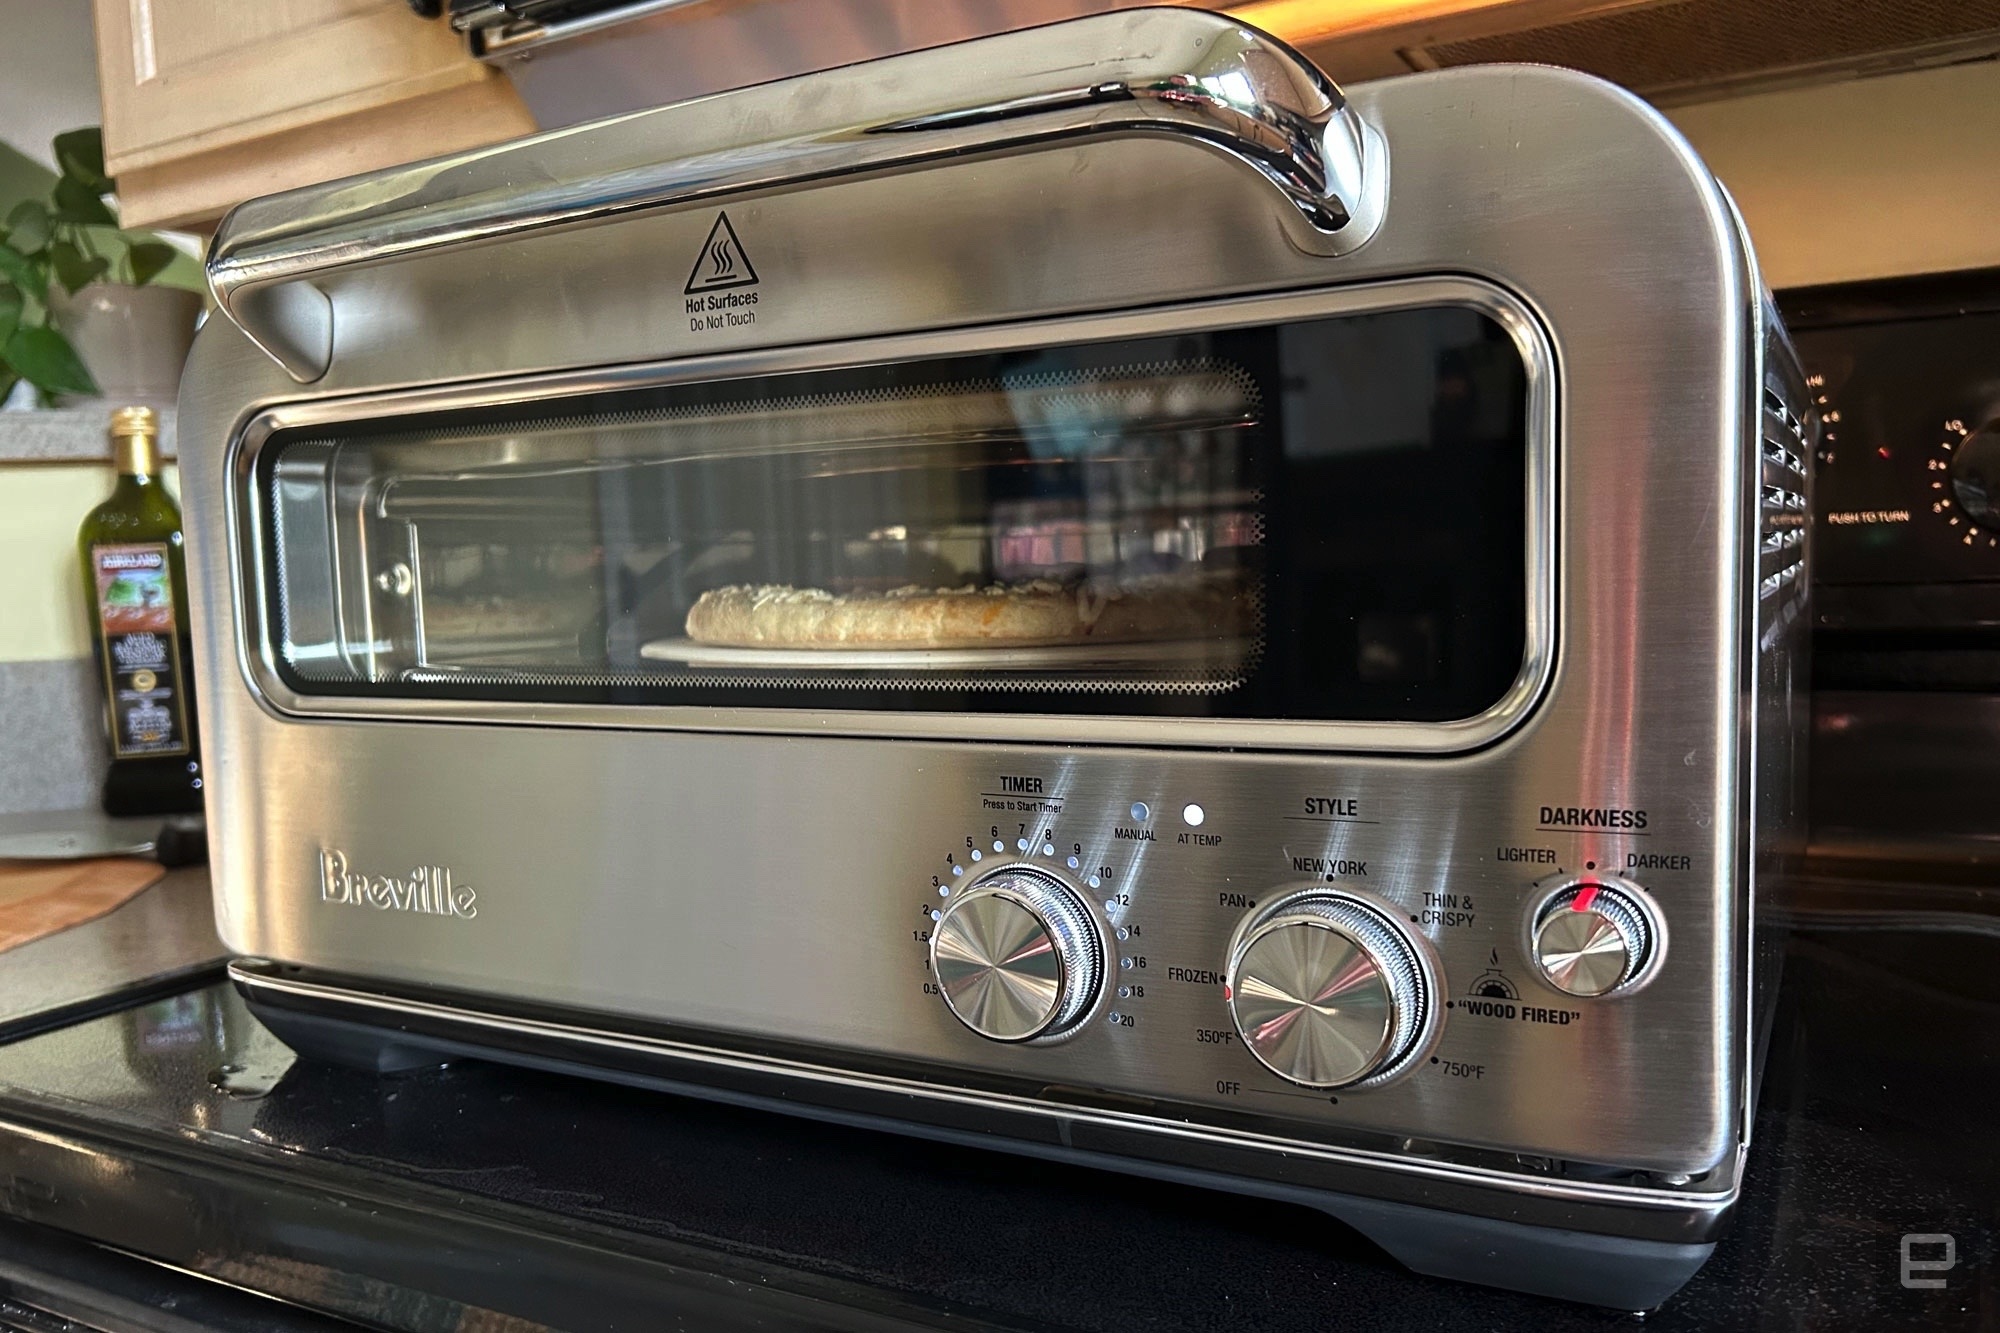 Breville Pizzaiolo review: A pricey pizza oven with lots of options | DeviceDaily.com